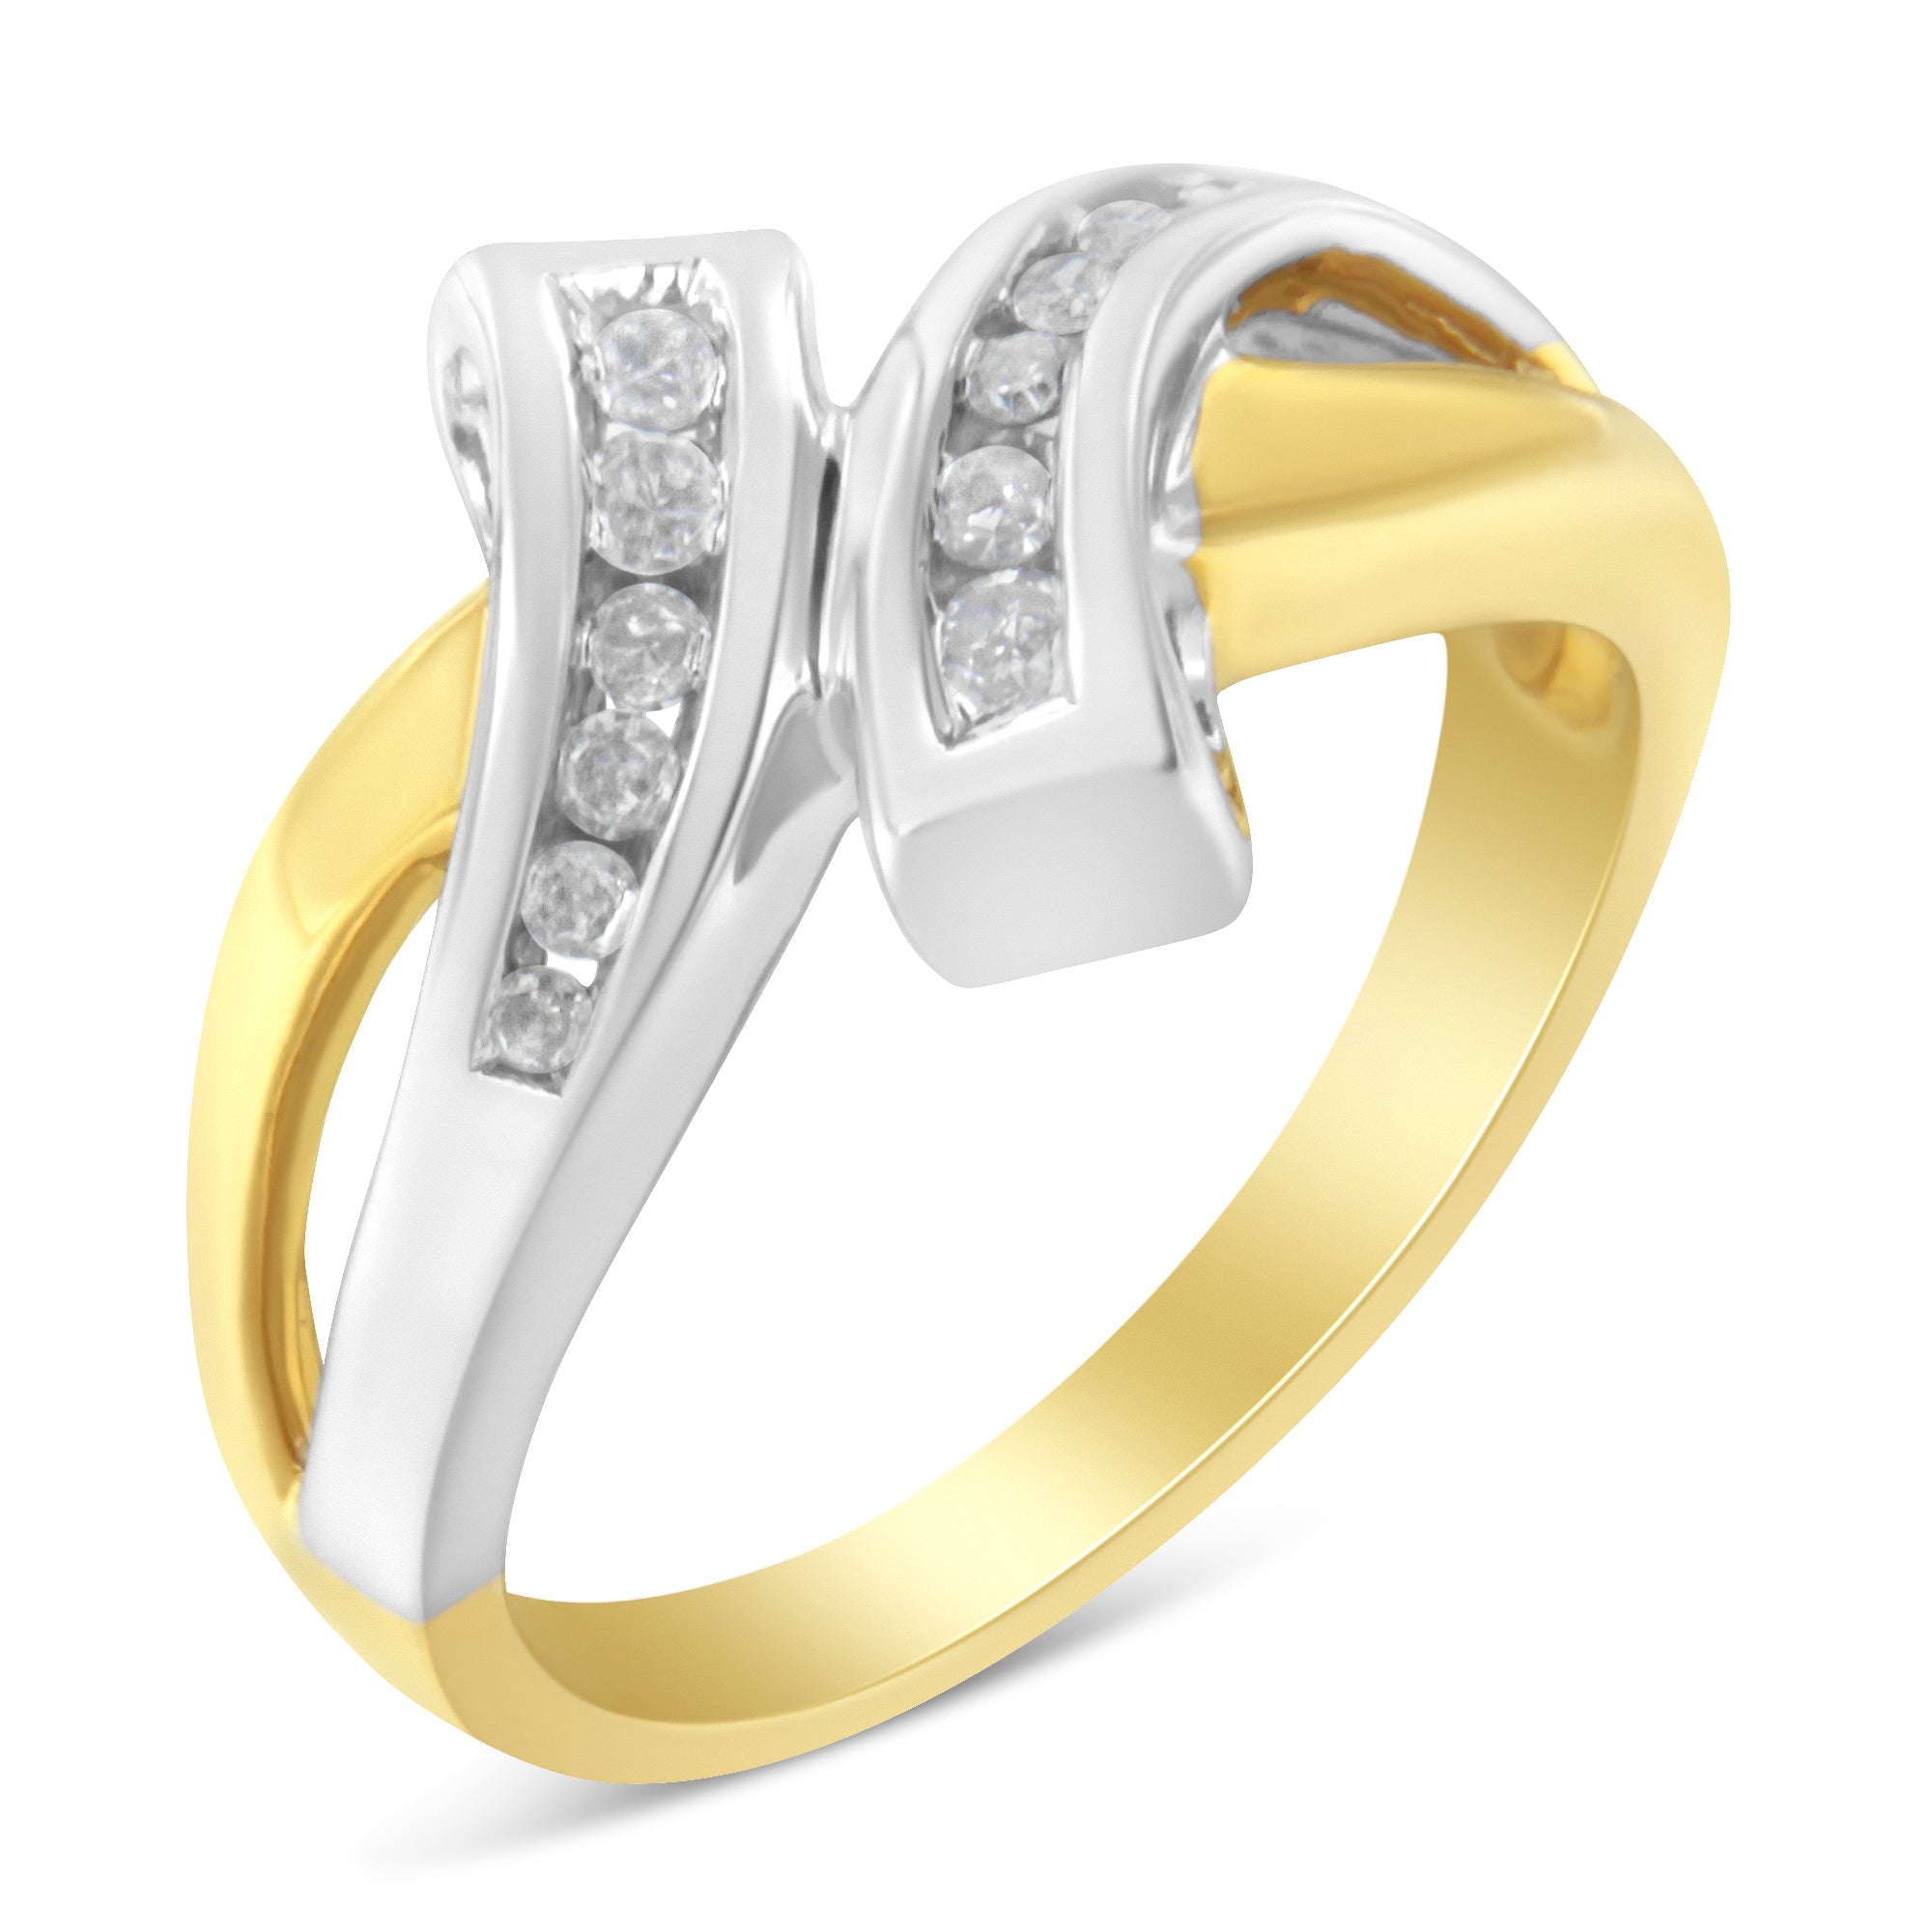 10K Two Toned Channel-Set Diamond Bypass Ring